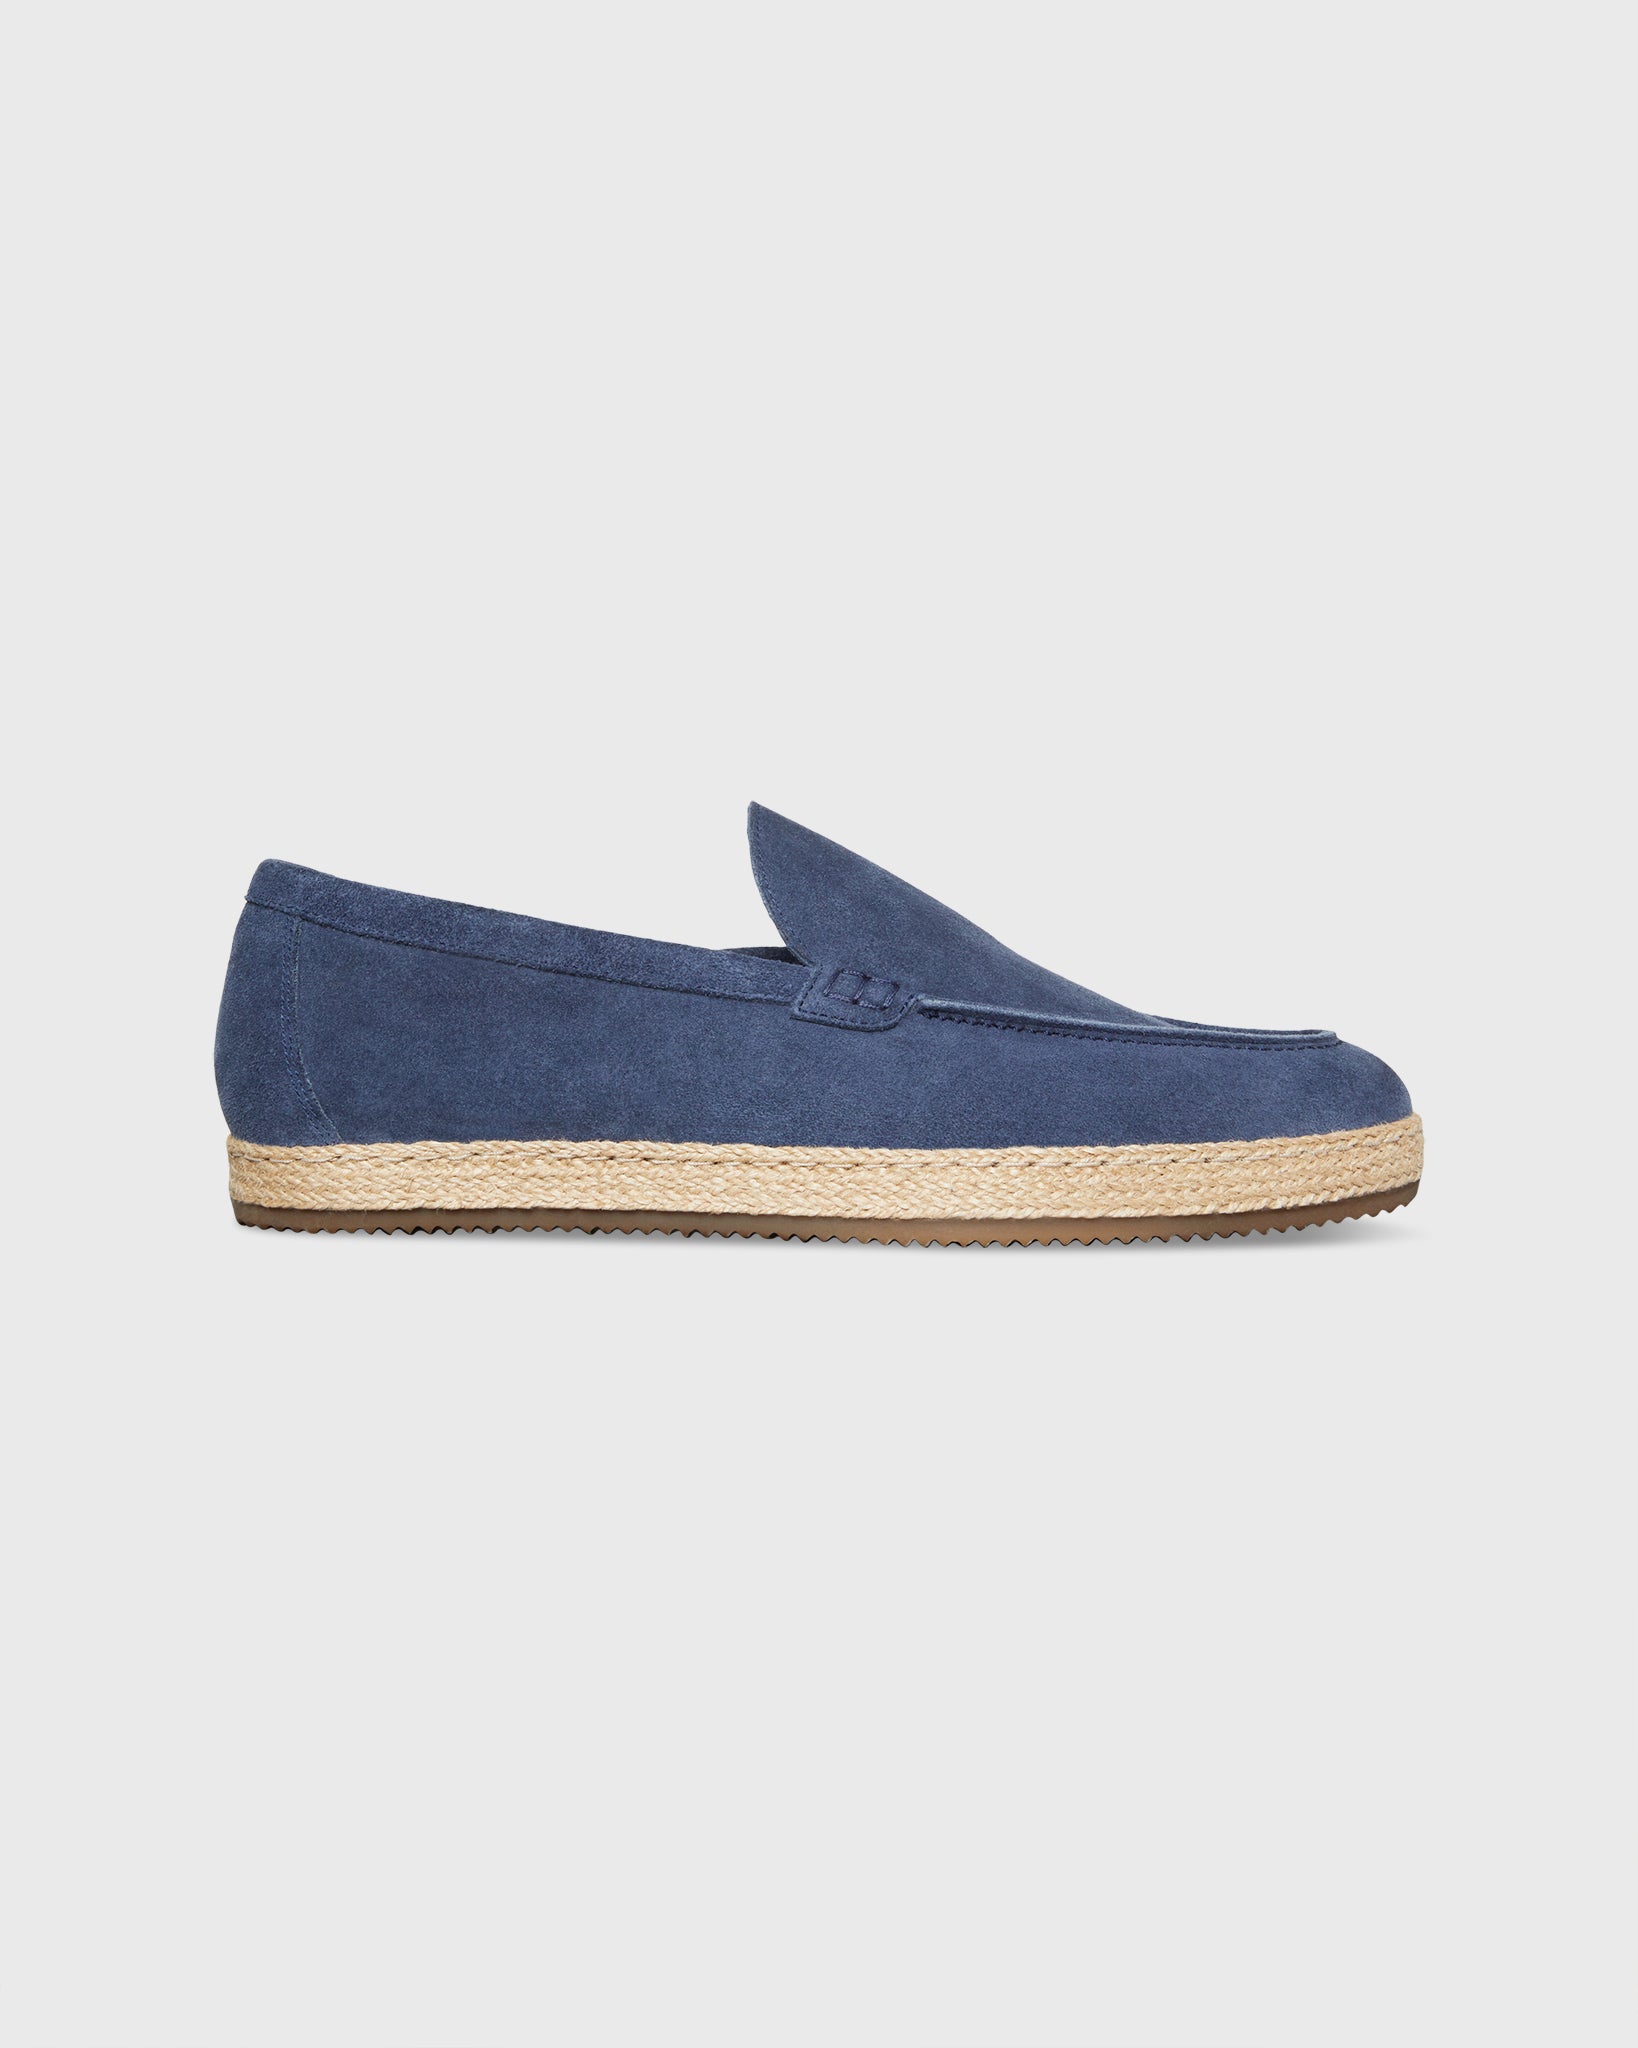 Nazare Espadrille in Pacific Blue Suede